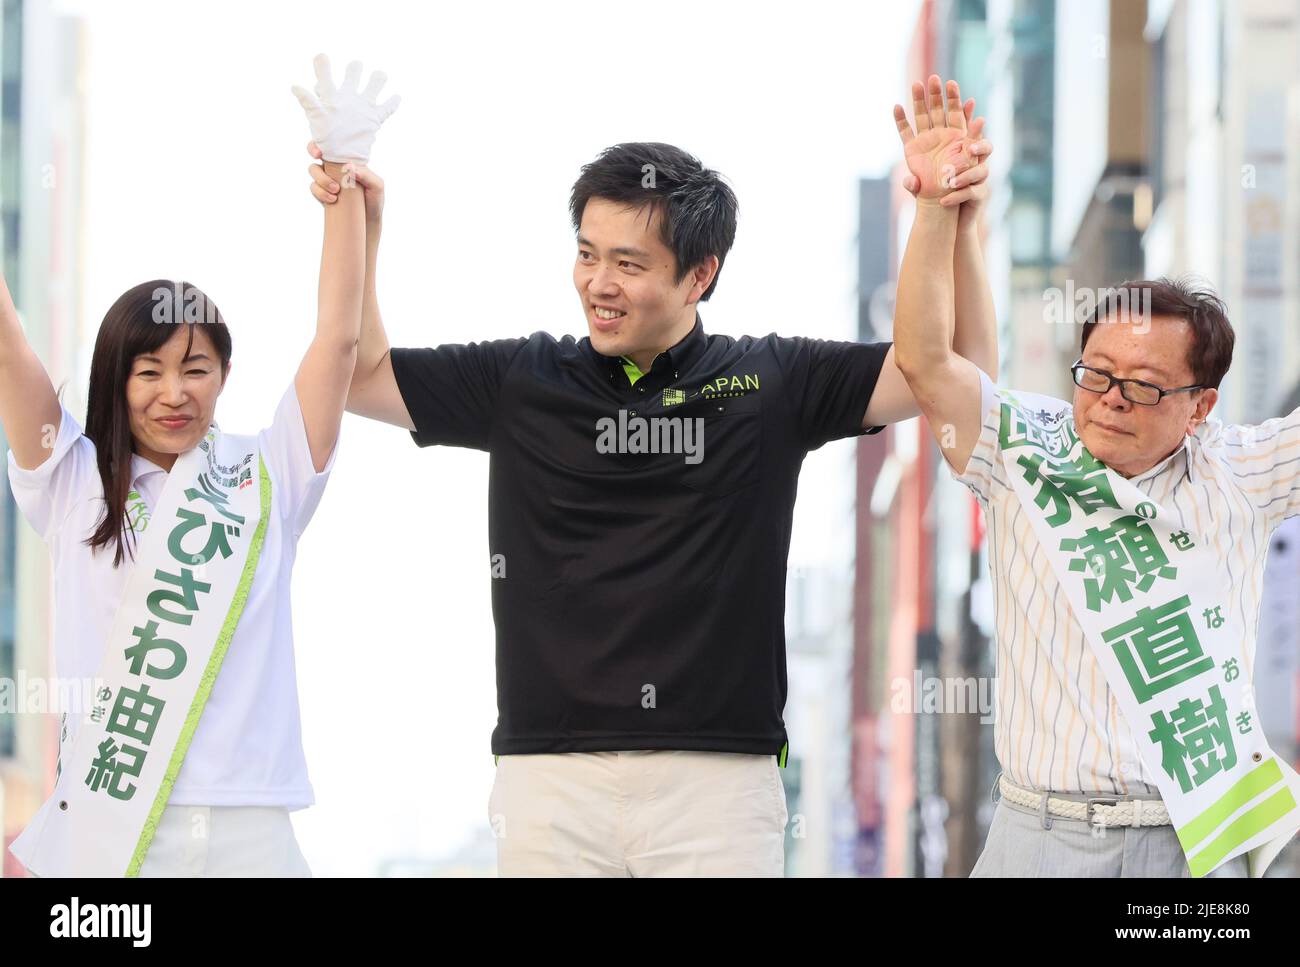 Tokyo, Japan. 26th June, 2022. Osaka Governor and deputy leader of opposition Japan Innovation Party Hirofumi Yoshimura (C) raises arms with his party candidates Yuki Ebisawa (L) and Naoki Inose for their campign of the July 10 Upper House election in Tokyo on Sunday, June 26, 2022. Credit: Yoshio Tsunoda/AFLO/Alamy Live News Stock Photo